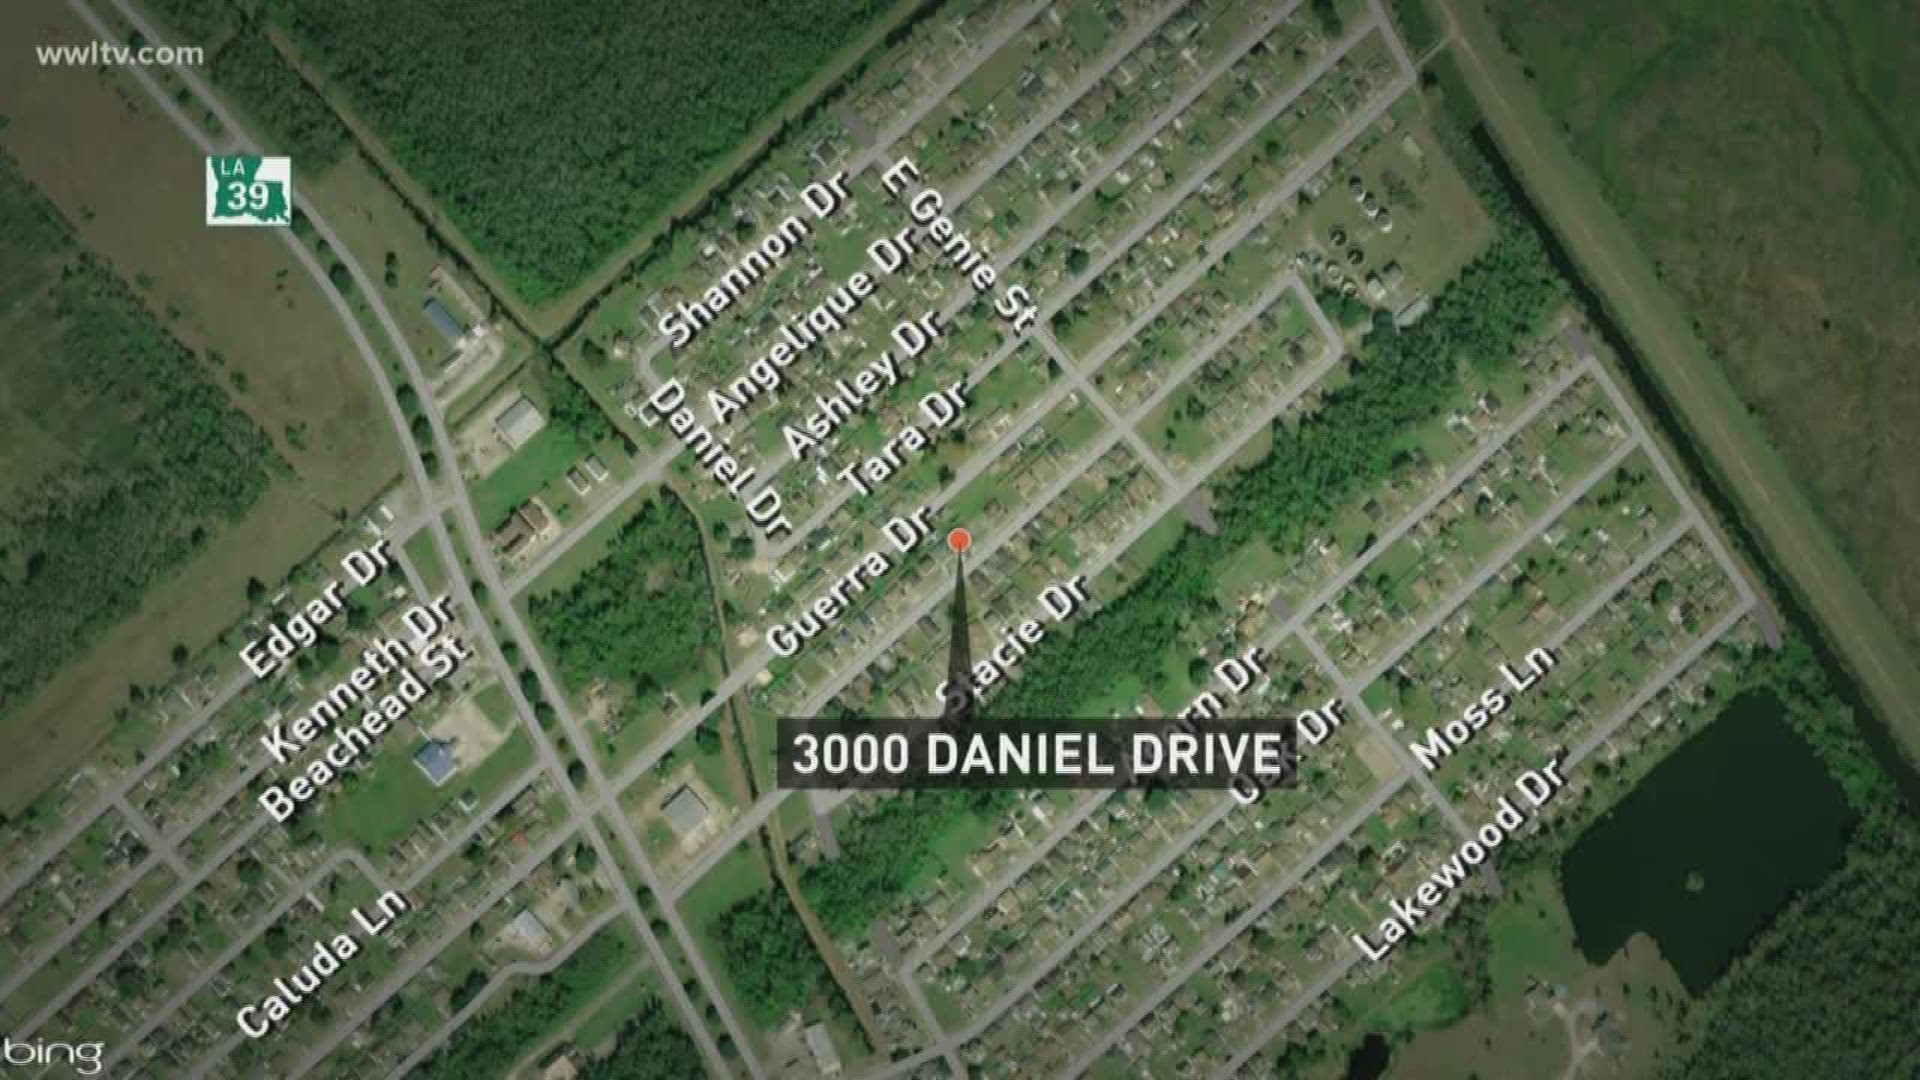 According to St. Bernard Parish Sheriff James Pohlmann, the shooting happened just before 9 p.m. in the 3000 block of Daniel Drive in Violet, La.